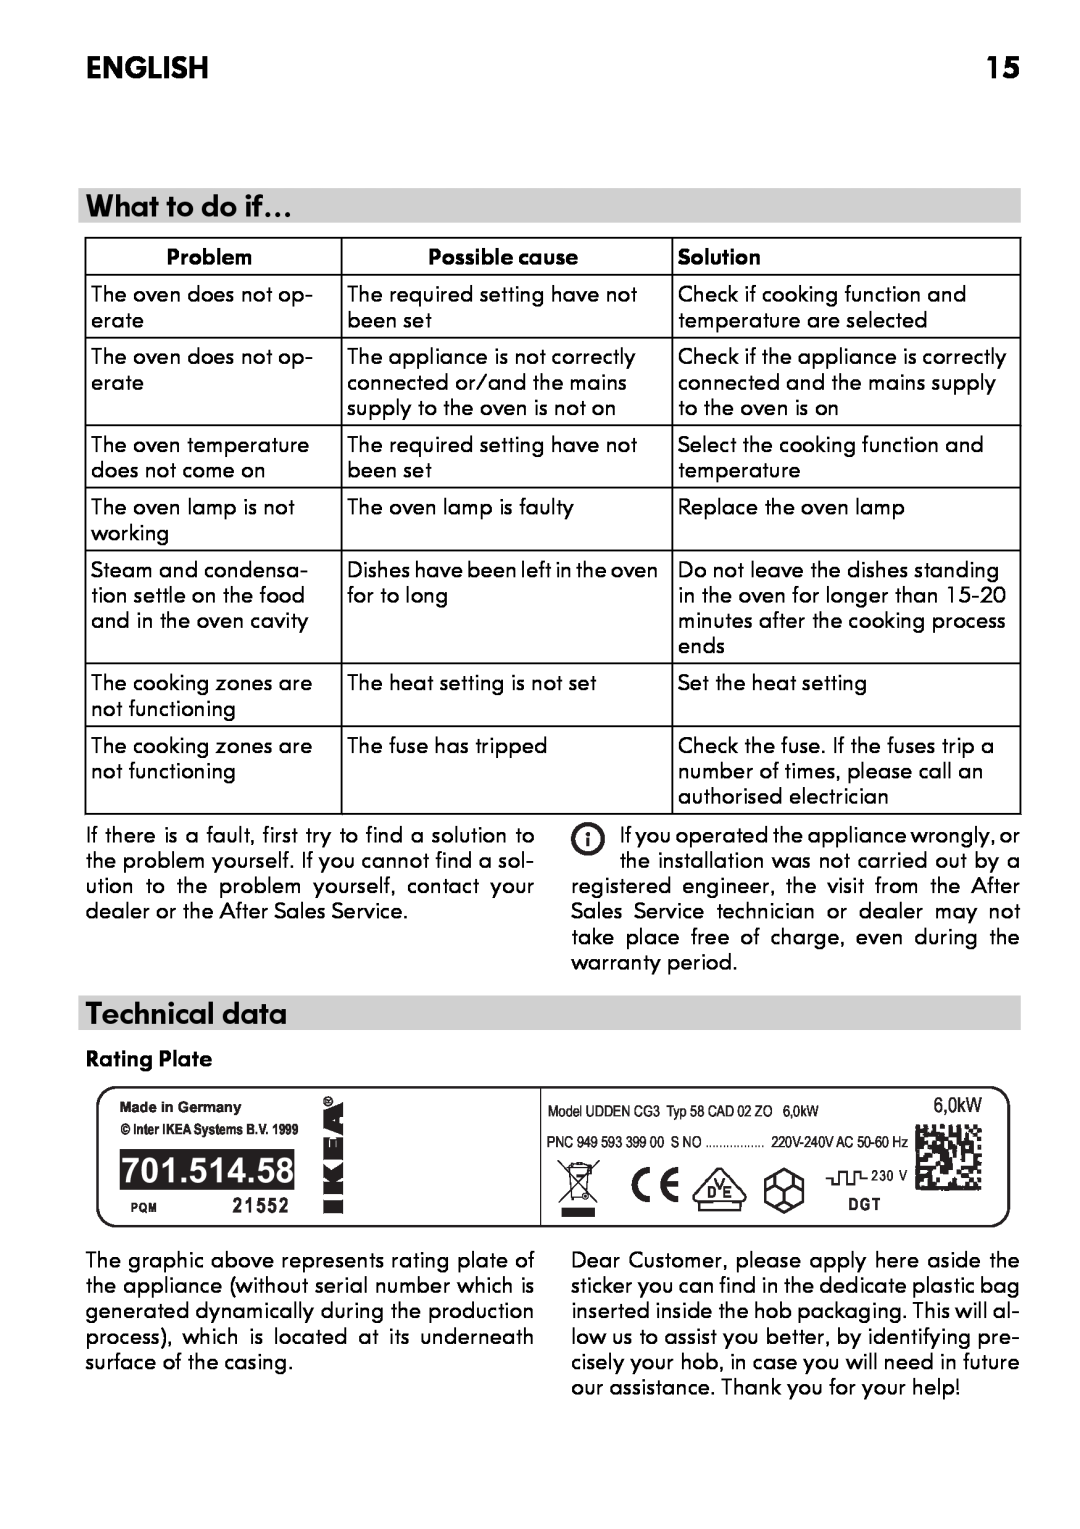 IKEA CG3 manual What to do if…, 701.514.58, English, Technical data, The oven temperature does not come on, P Q M2 